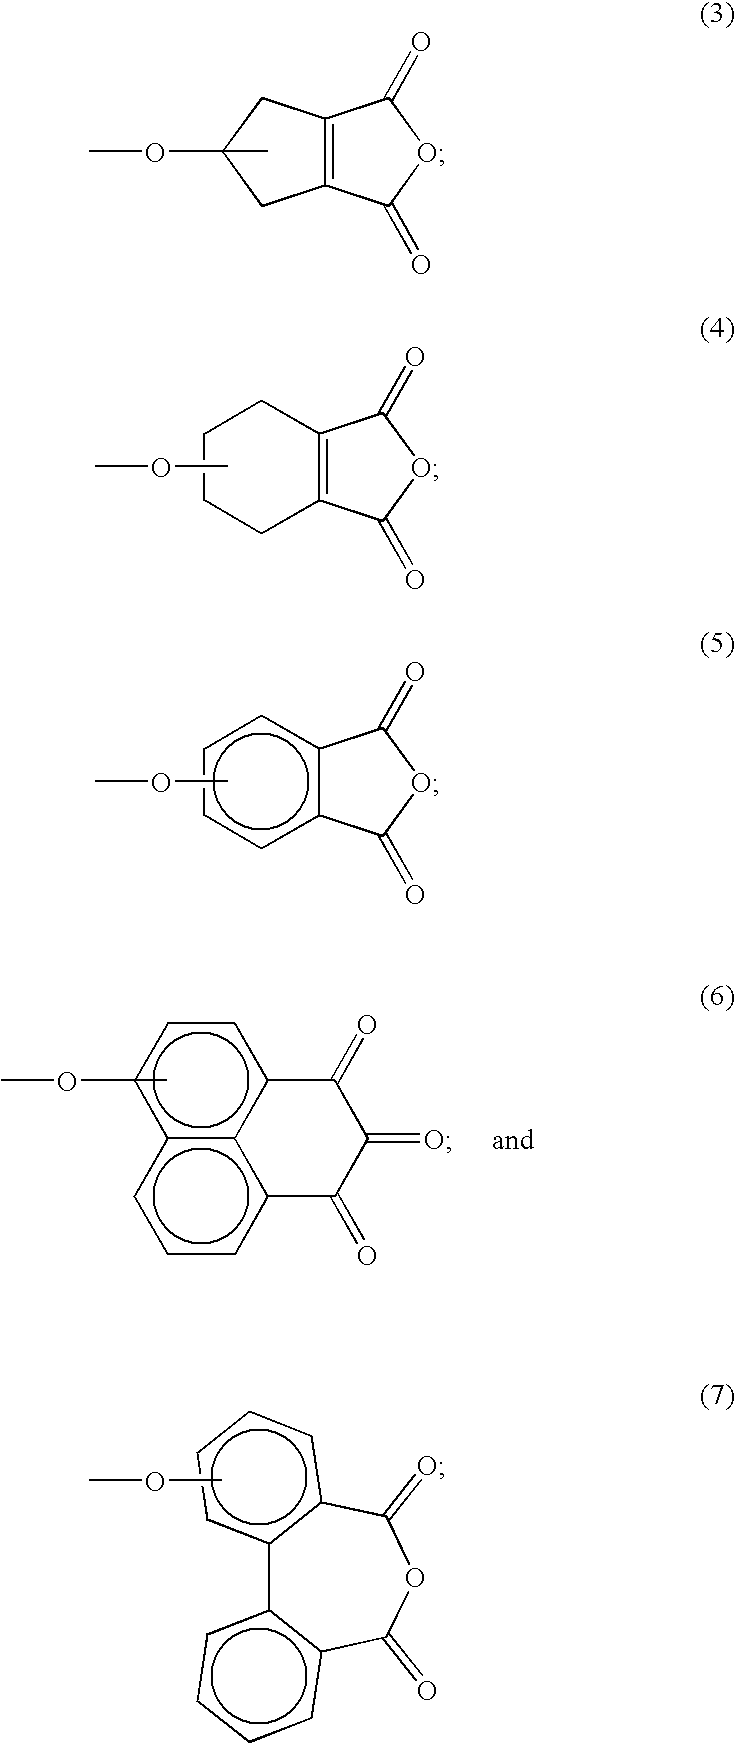 Method of making carbon nanotube patterned film or carbon nanotube composite using carbon nanotubes surface-modified with polymerizable moieties